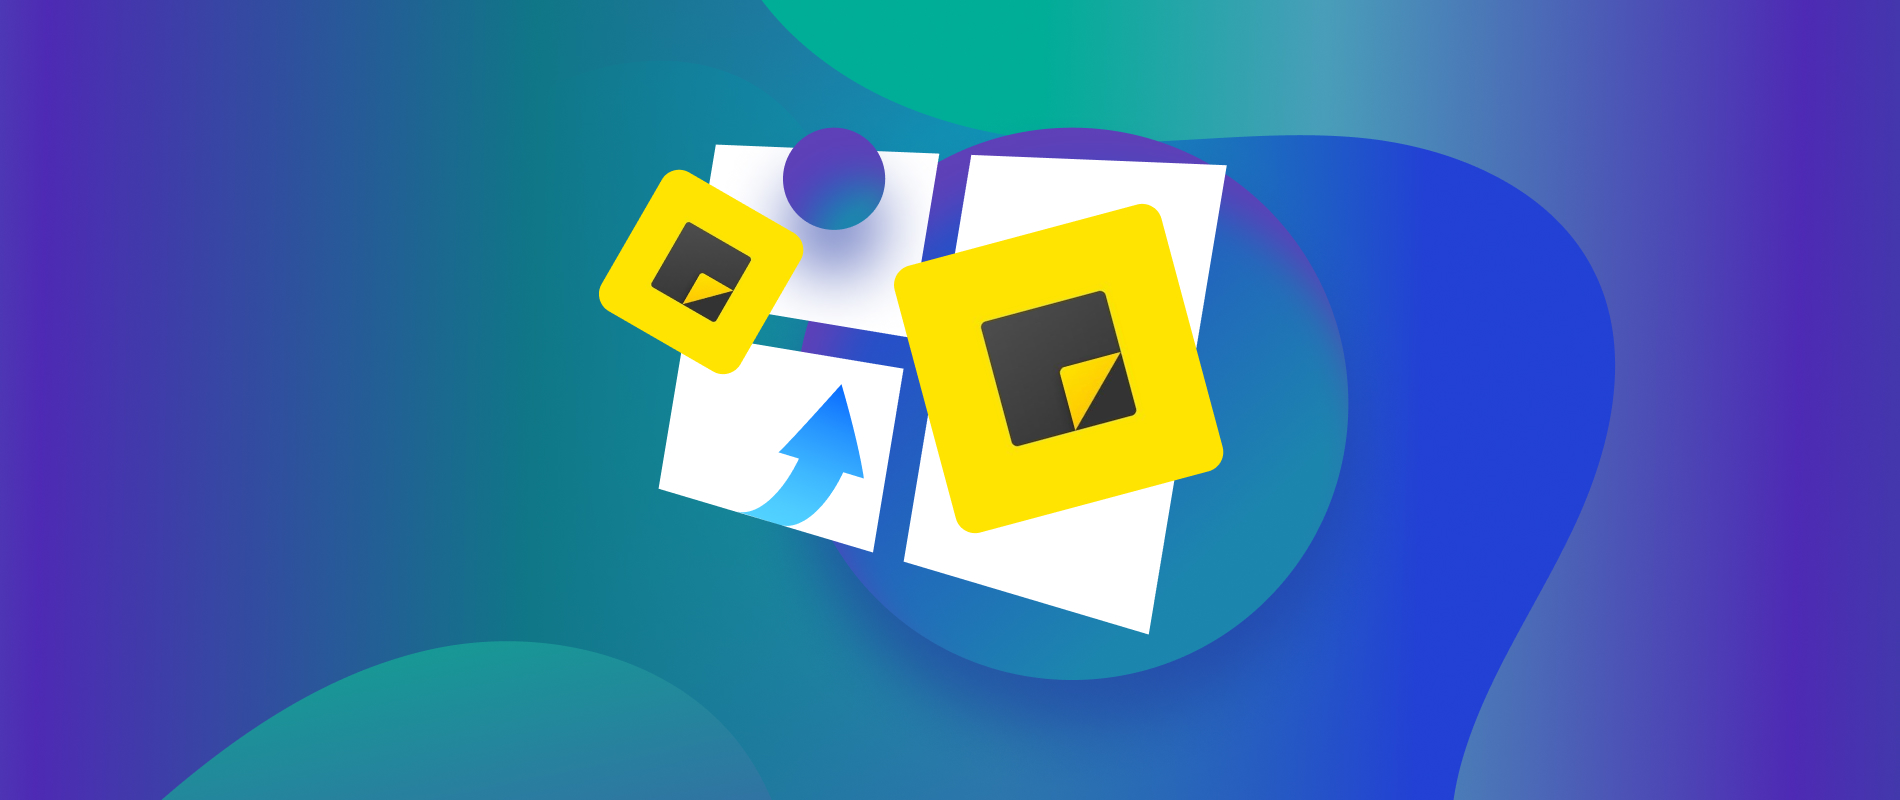 Havanemone shilling besværlige How to Recover Deleted/Disappeared Sticky Notes on Windows 10